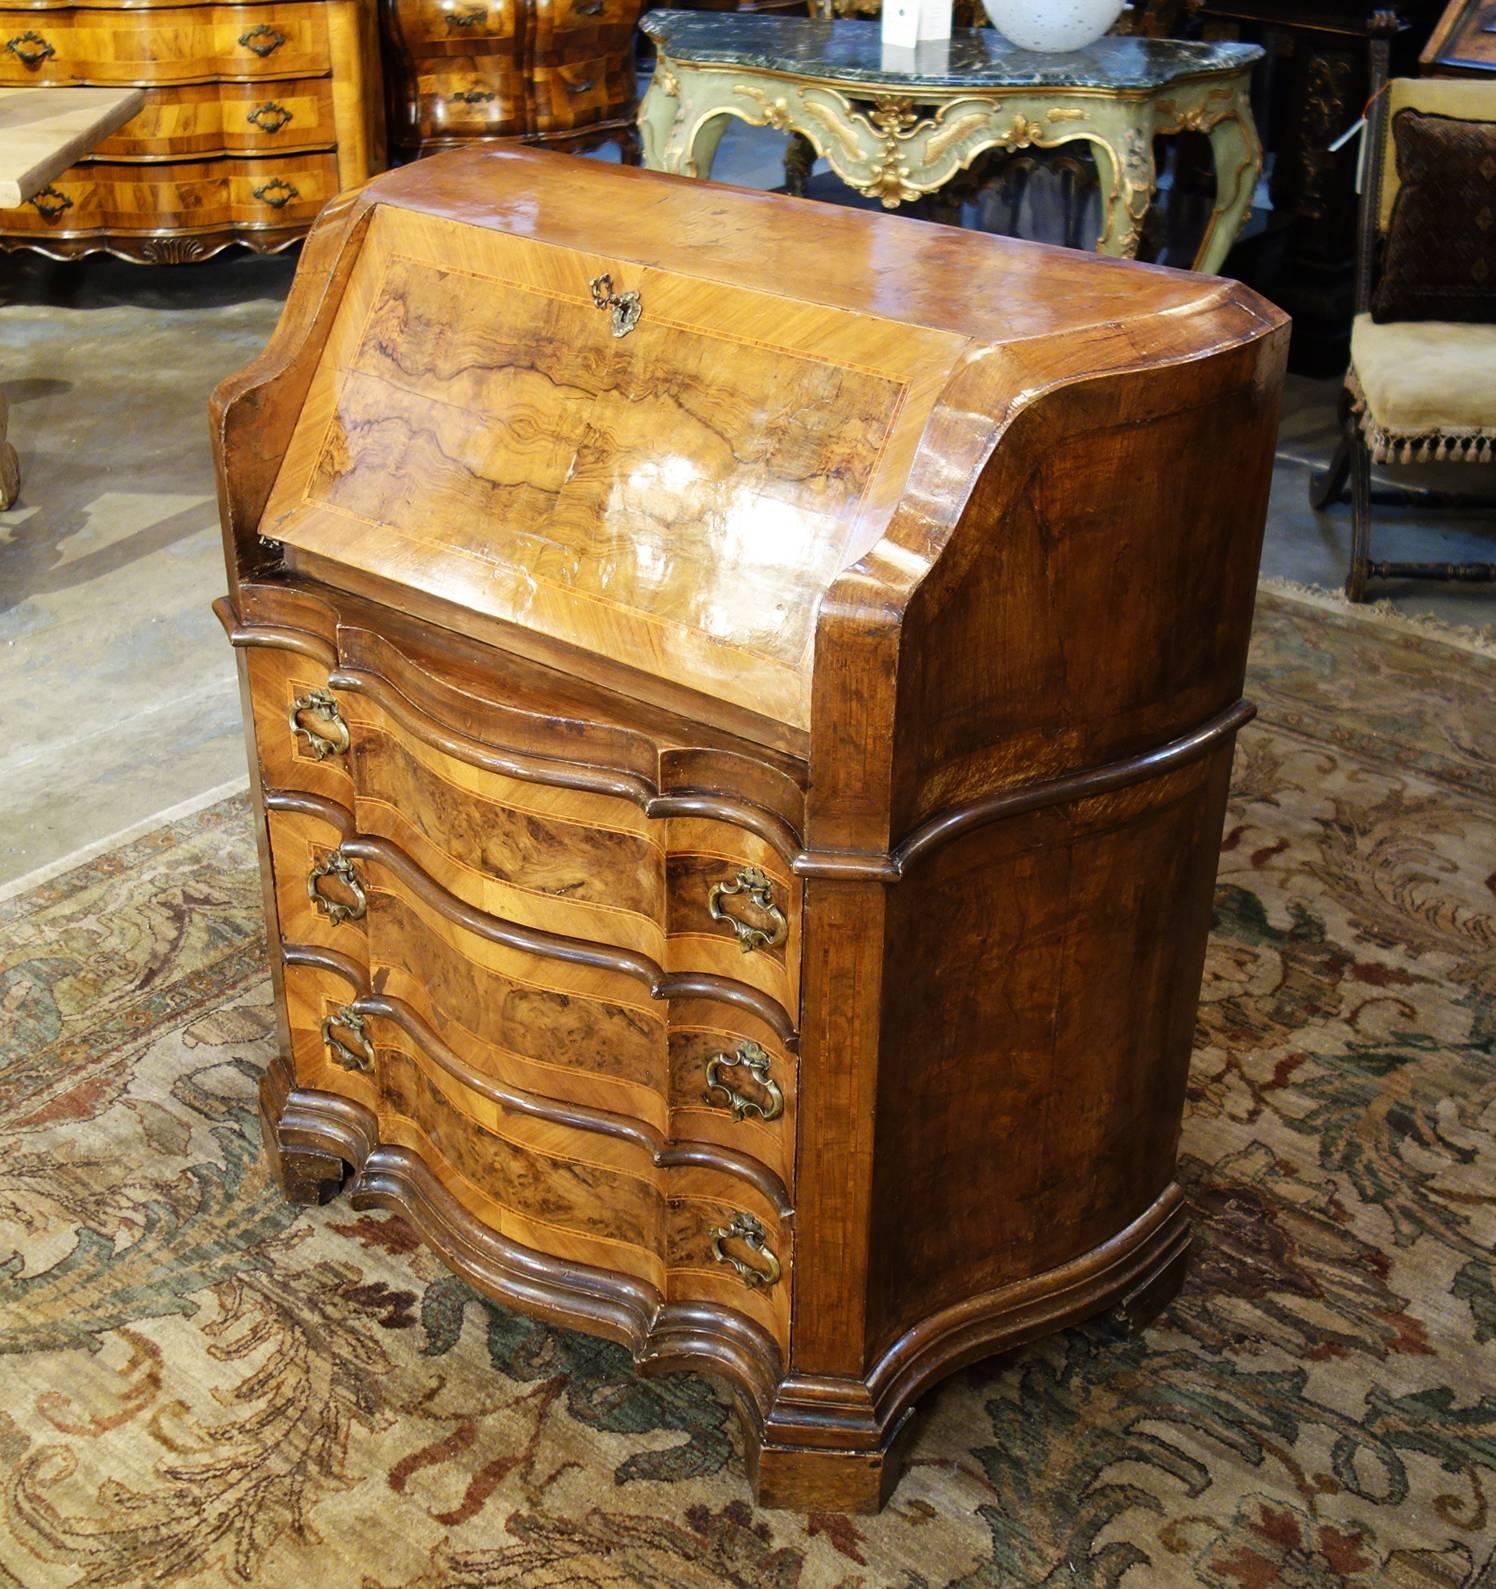 Late 19th Century Italian Walnut Burl Inlaid Louis XIV Secretary Drop Leaf Desk.
Trim three-drawer bureau chest featuring secretary drop lid with lock and key revealing small drawers and compartments. Beautiful walnut veneers and solids with